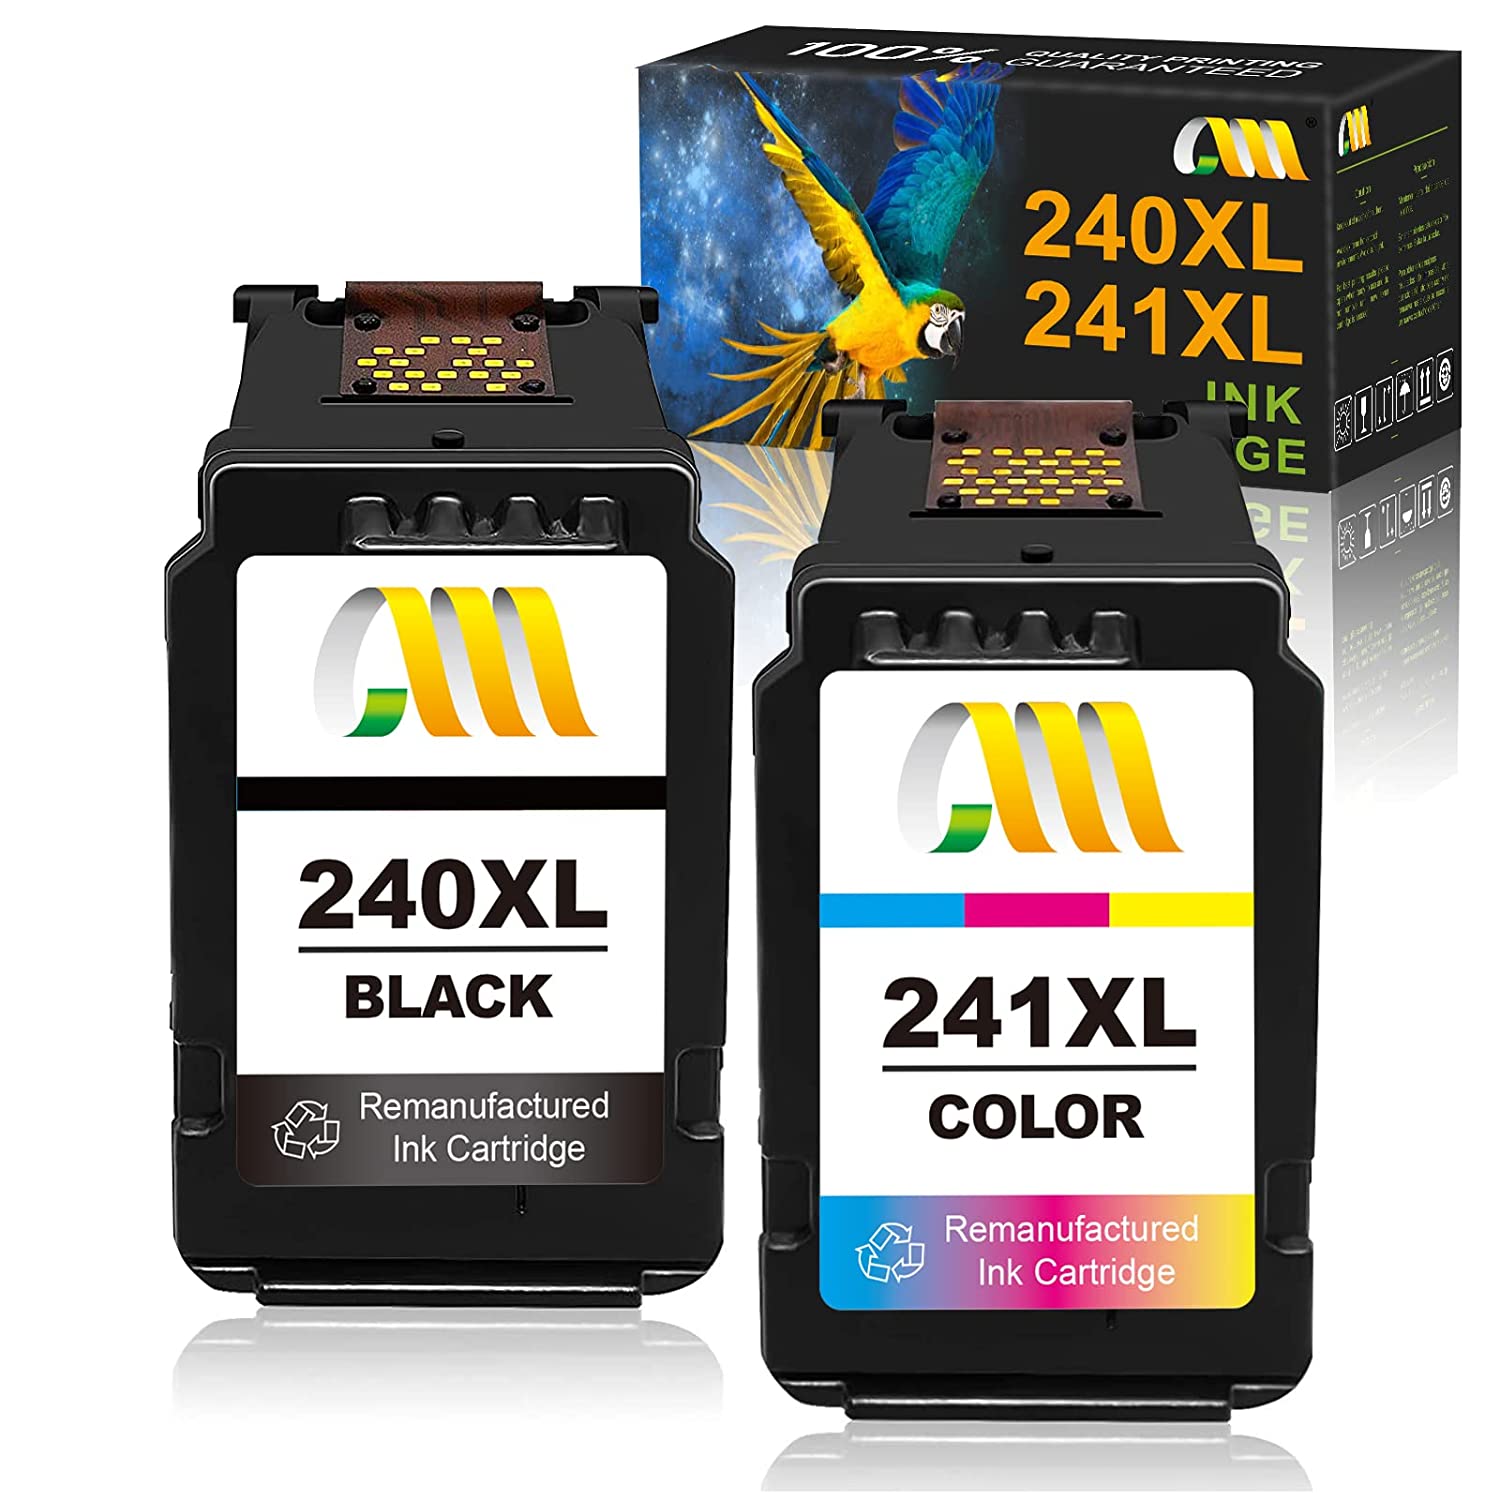 Ink Cartridge Replacement For Canon 240Xl 241Xl Combo Pack Pg-240Xl/Cl-241Xl Ink For Pixma Mg3620 Ts5120 Mg522 Mg3520 Mg2120 Mx532 Mx472 Mx452 Printer (1 Black ..